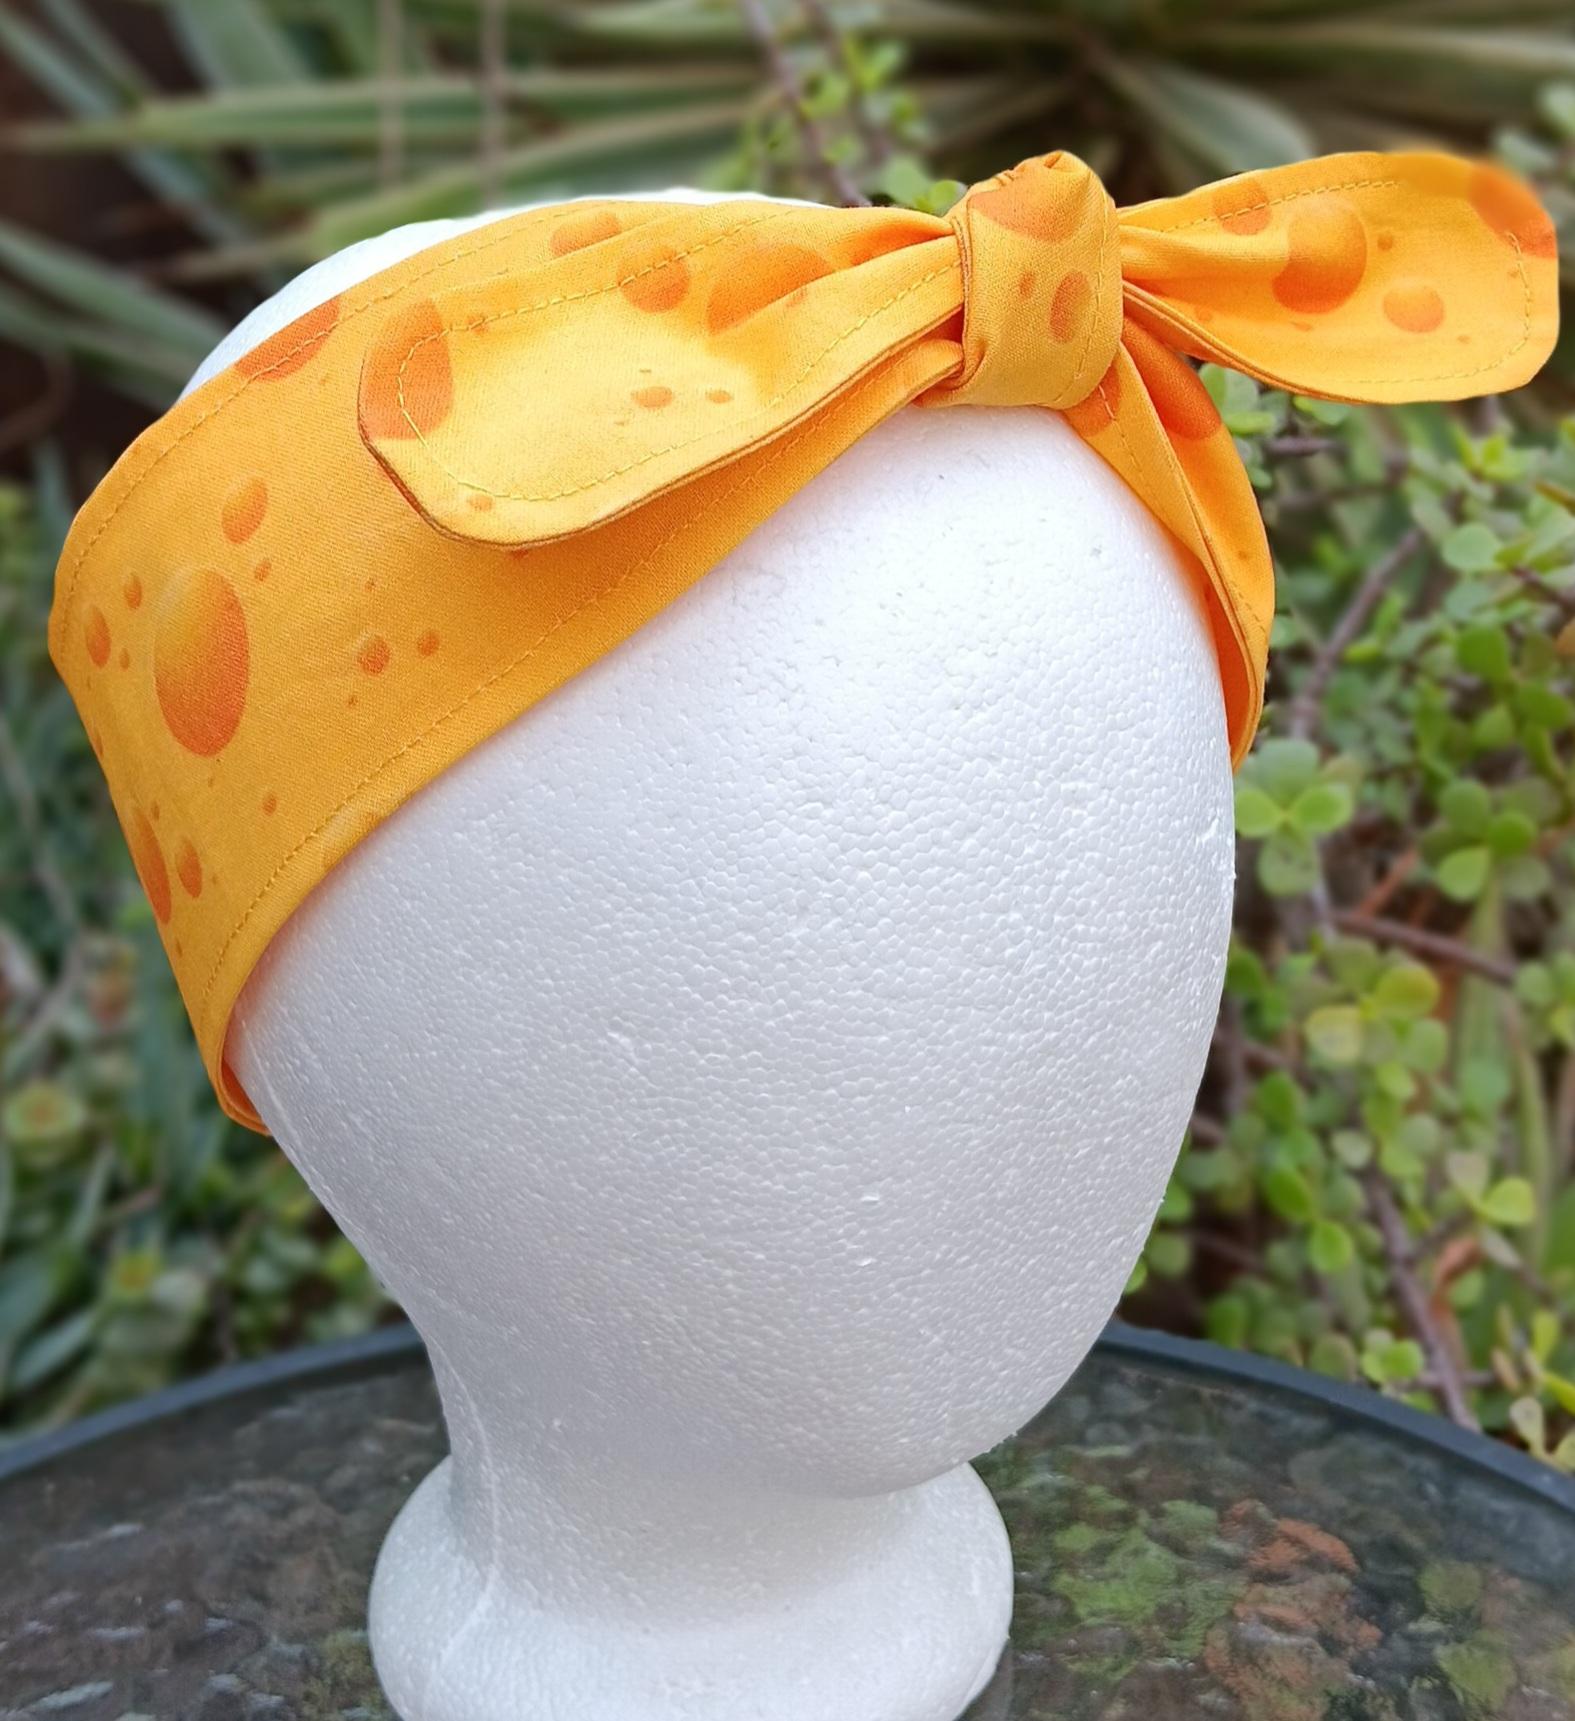 3” Wide Cheese Headband, cheesehead, cheese lover gift, Wisconsin cheese, hair wrap, hair tie, head scarf, pin up style, retro style